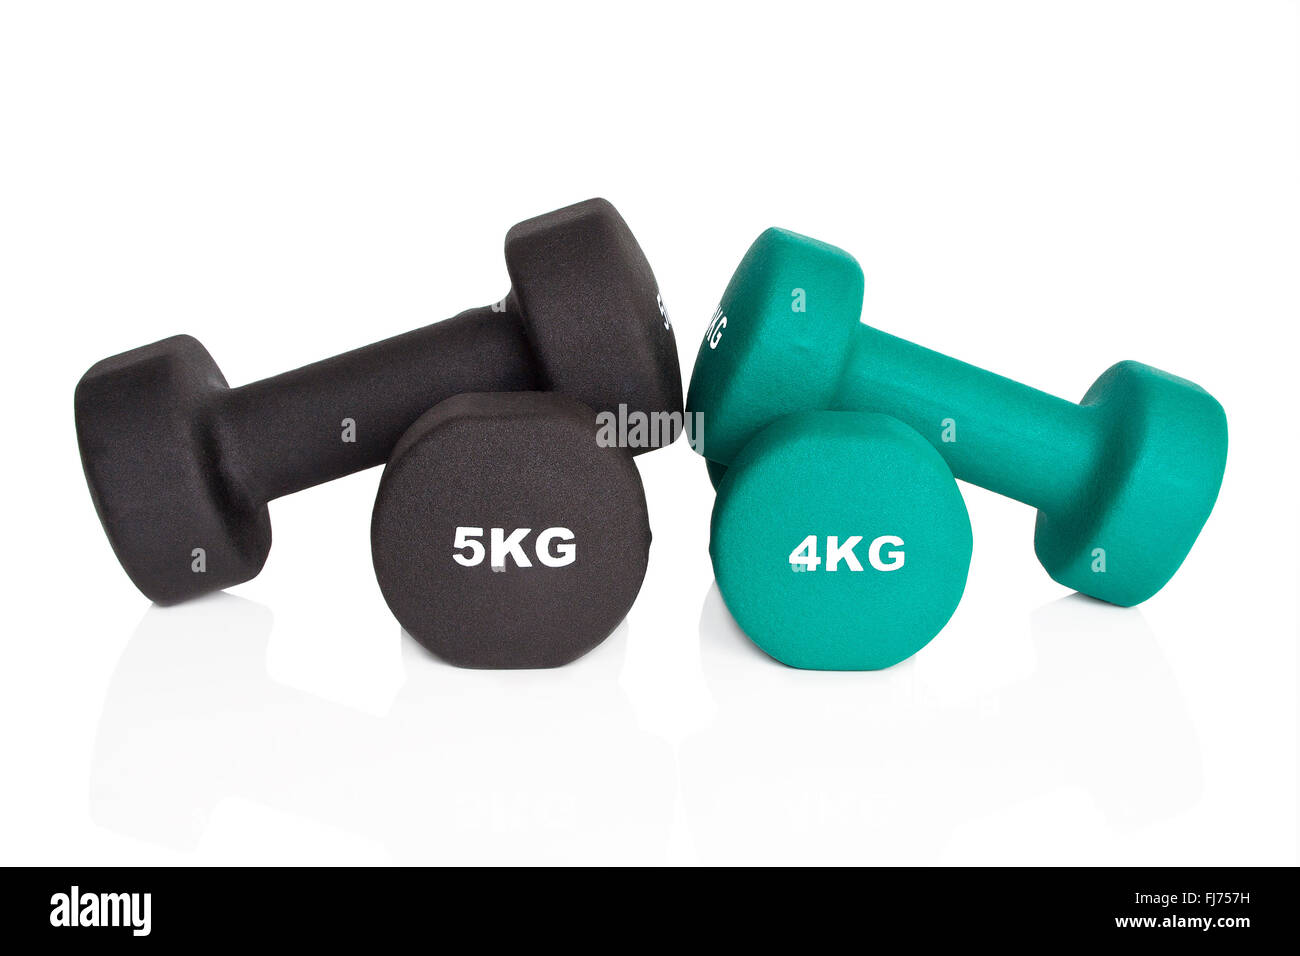 Green 4kg and black 5kg dumbbells isolated on white background. Weights for a fitness training. Stock Photo